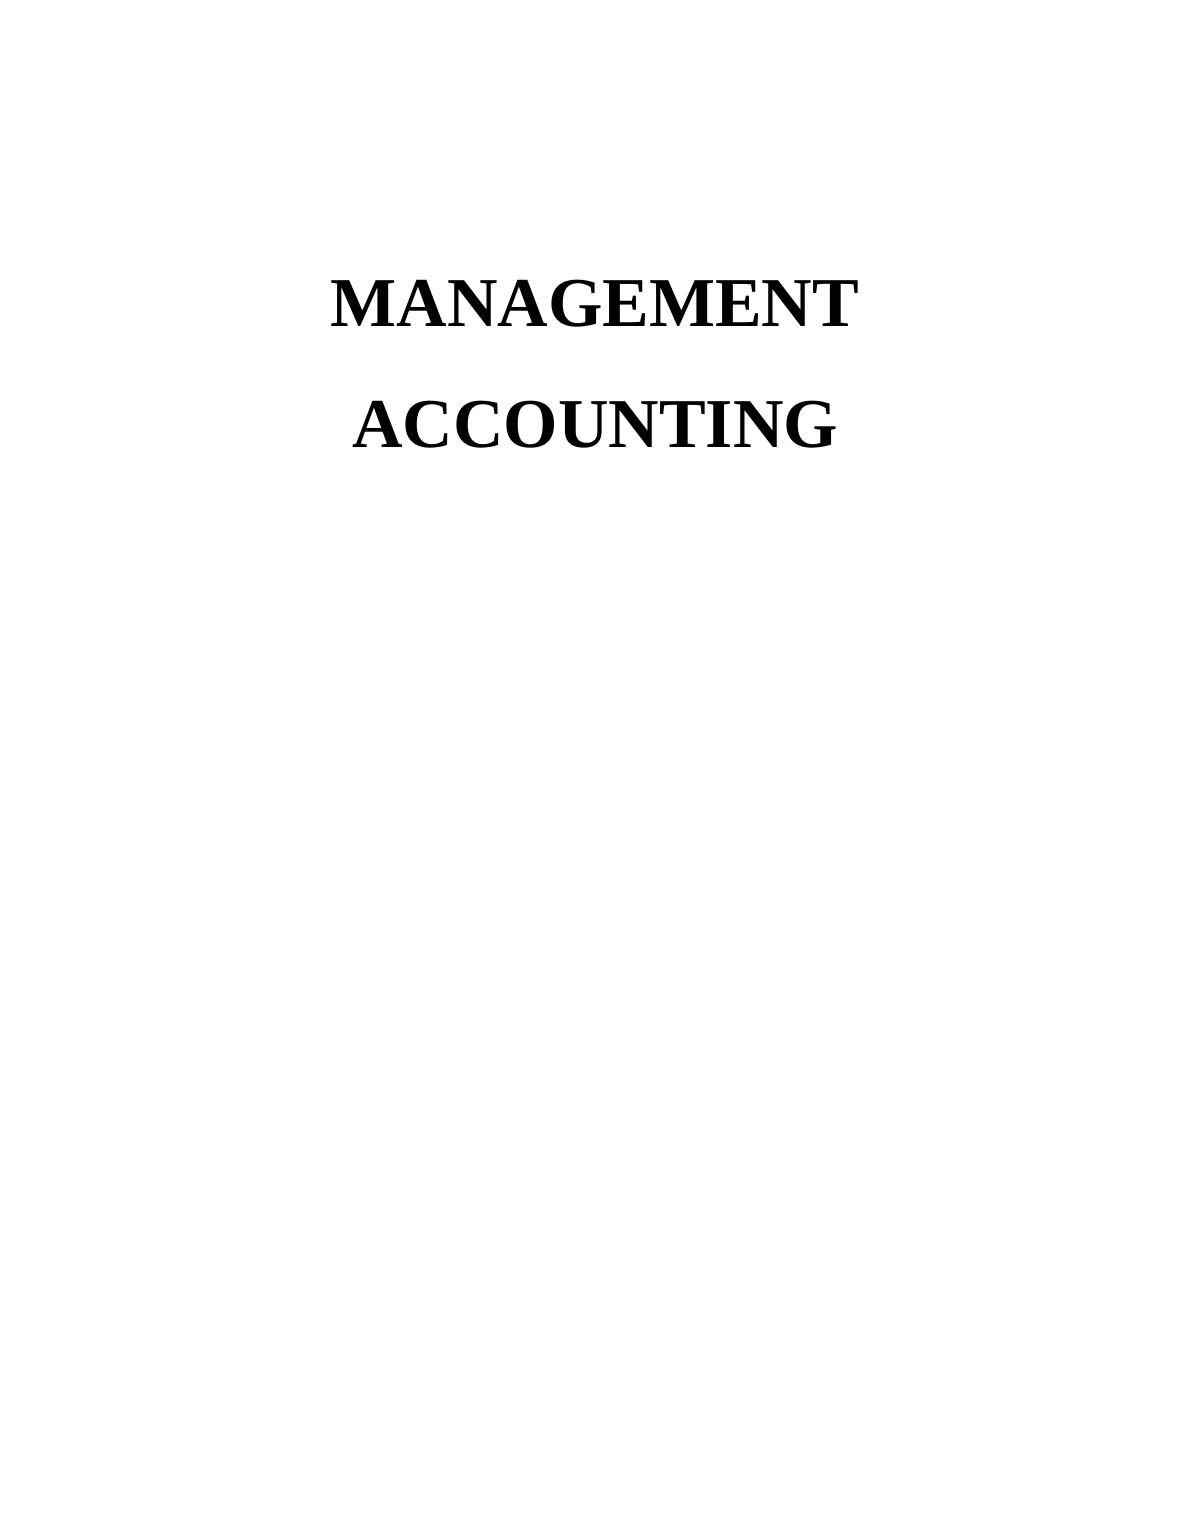 Management Accounting Assignment Solution - Zylla company_1